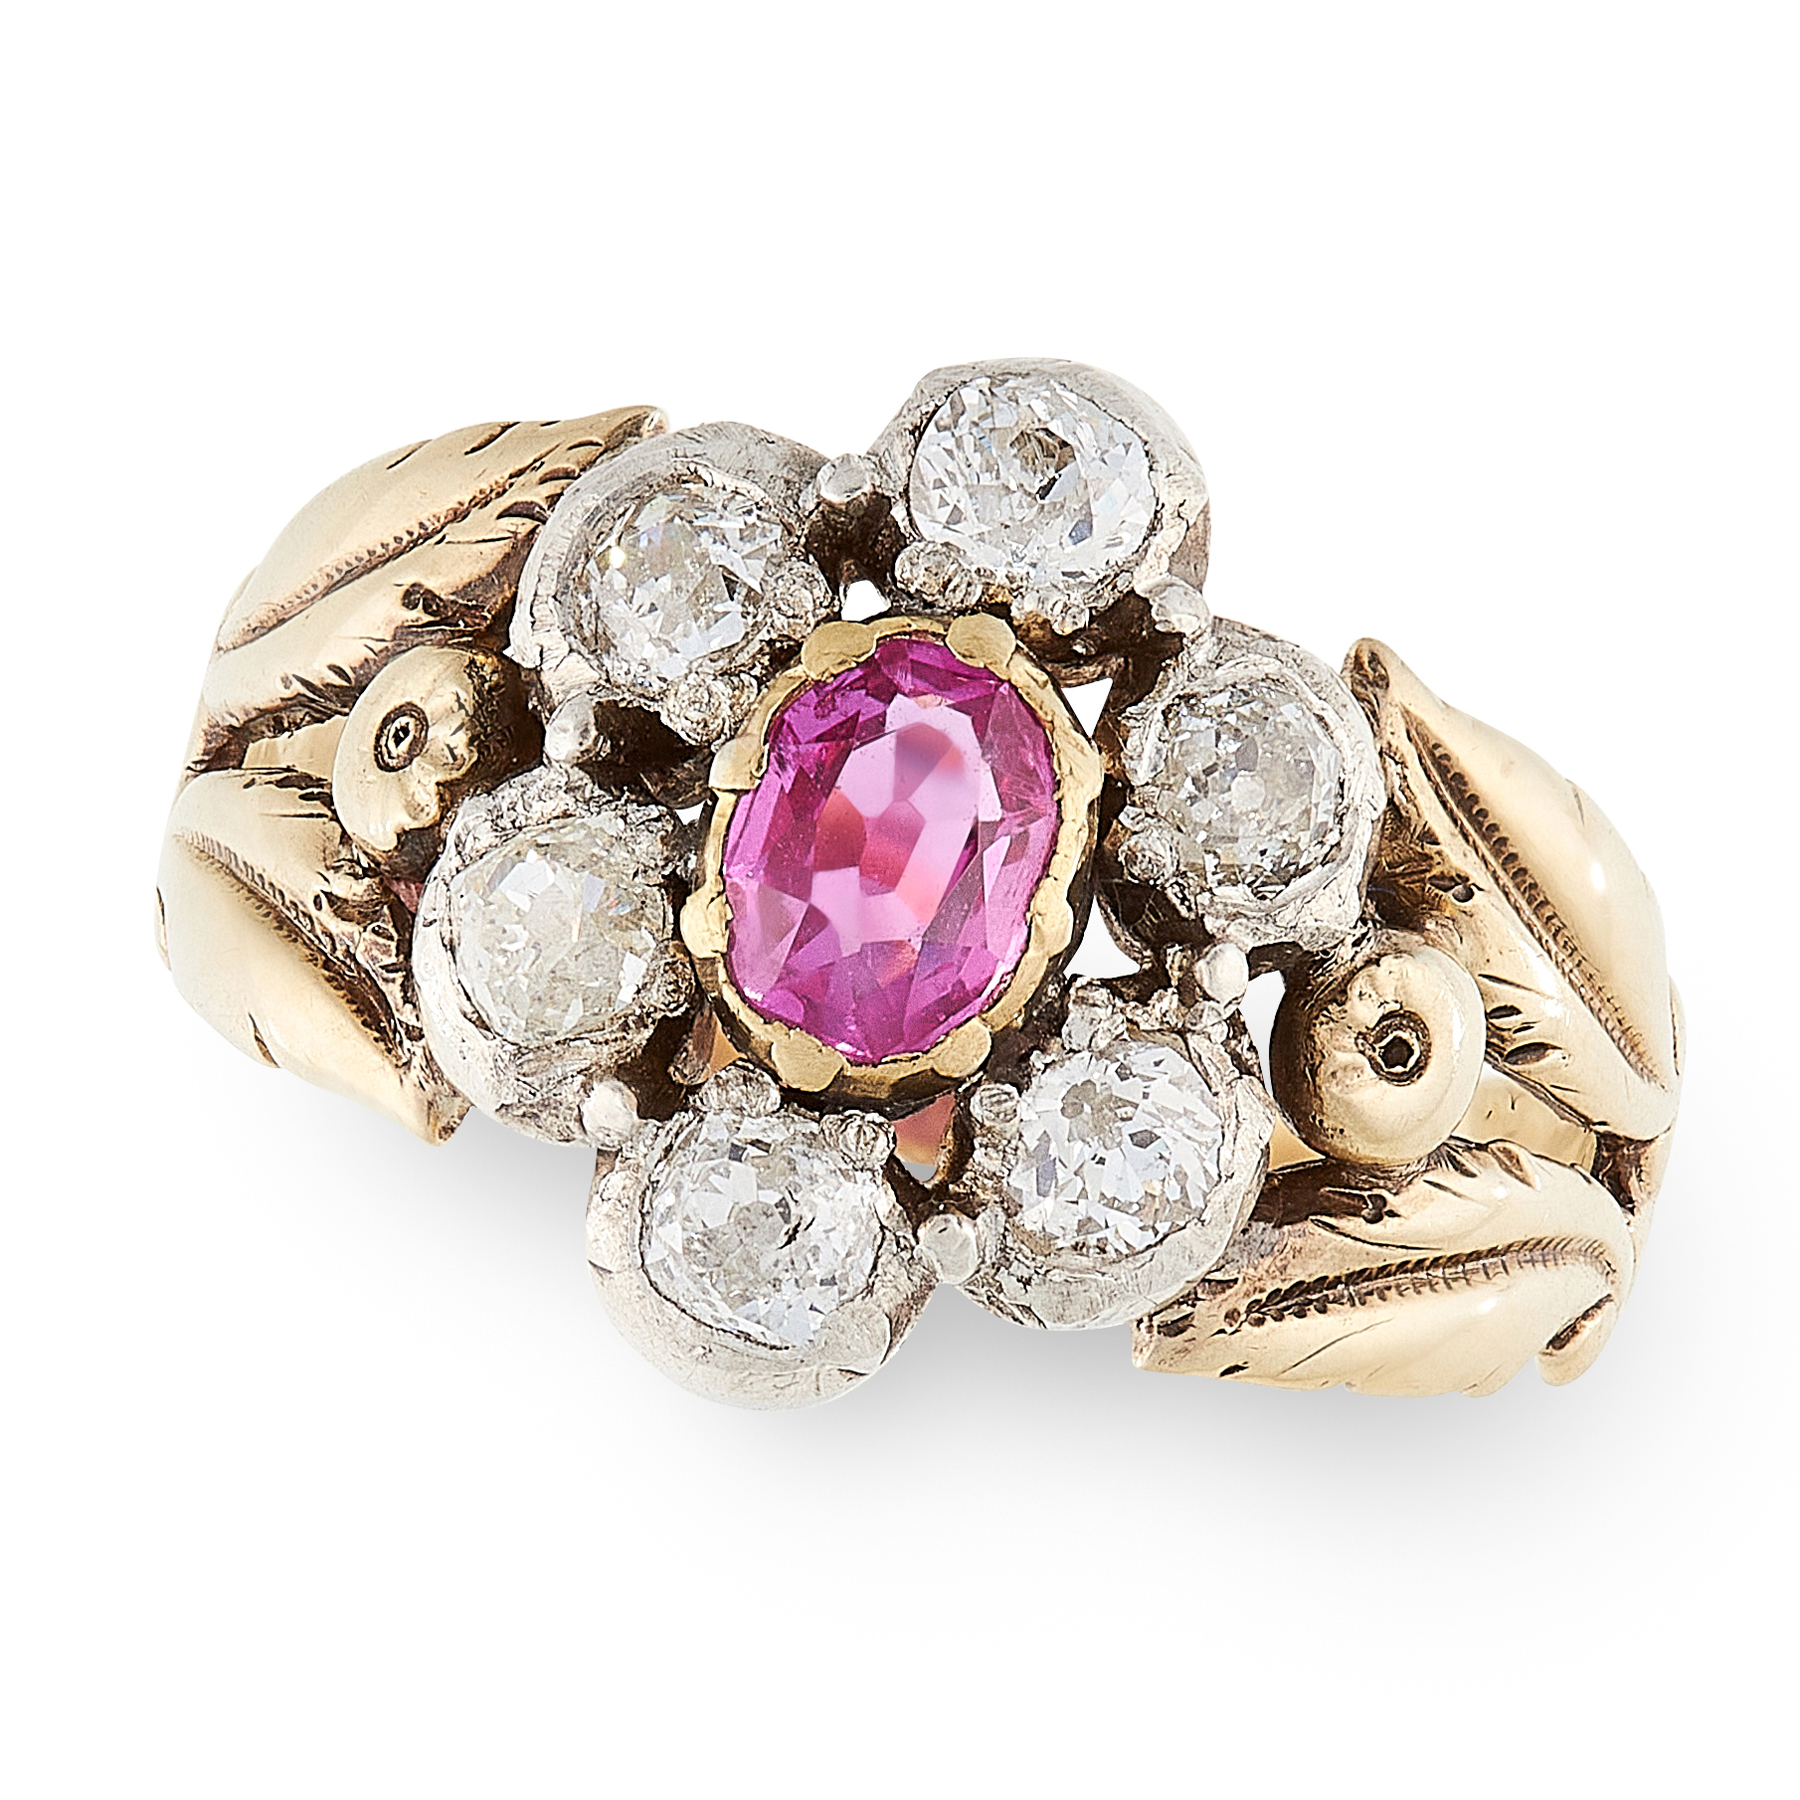 AN ANTIQUE RUBY AND DIAMOND RING, 19TH CENTURY in high carat yellow gold and silver, set with an